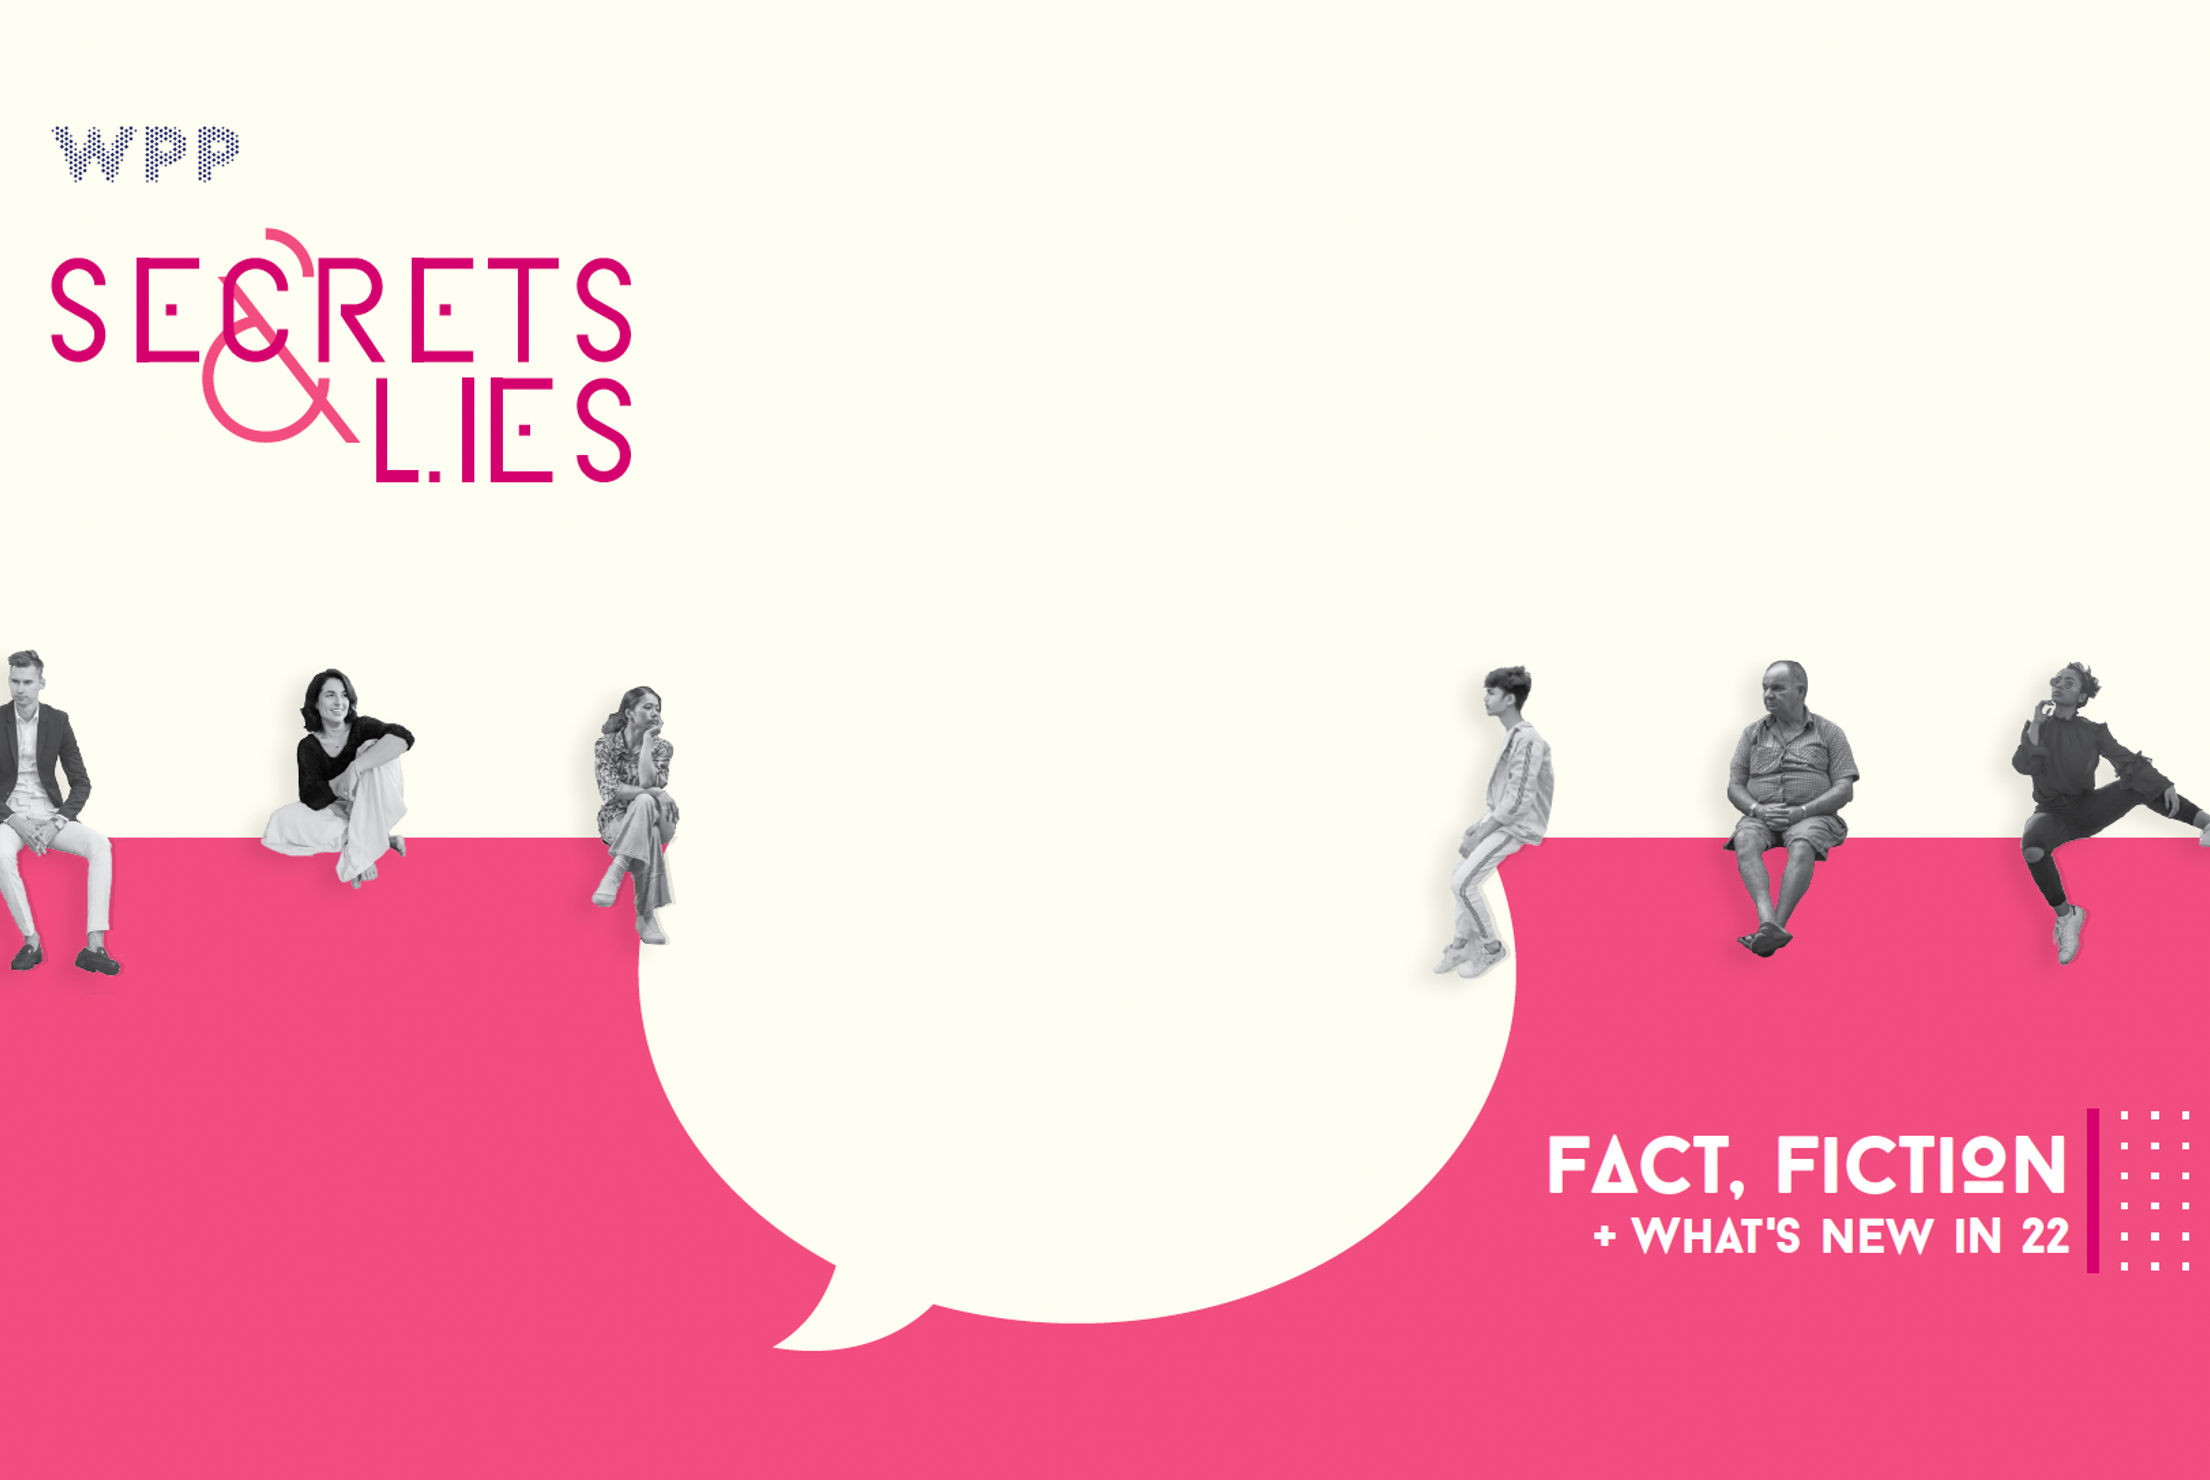 Secrets and Lies chapter 6 front cover "Fact, fiction + what's new in 22"